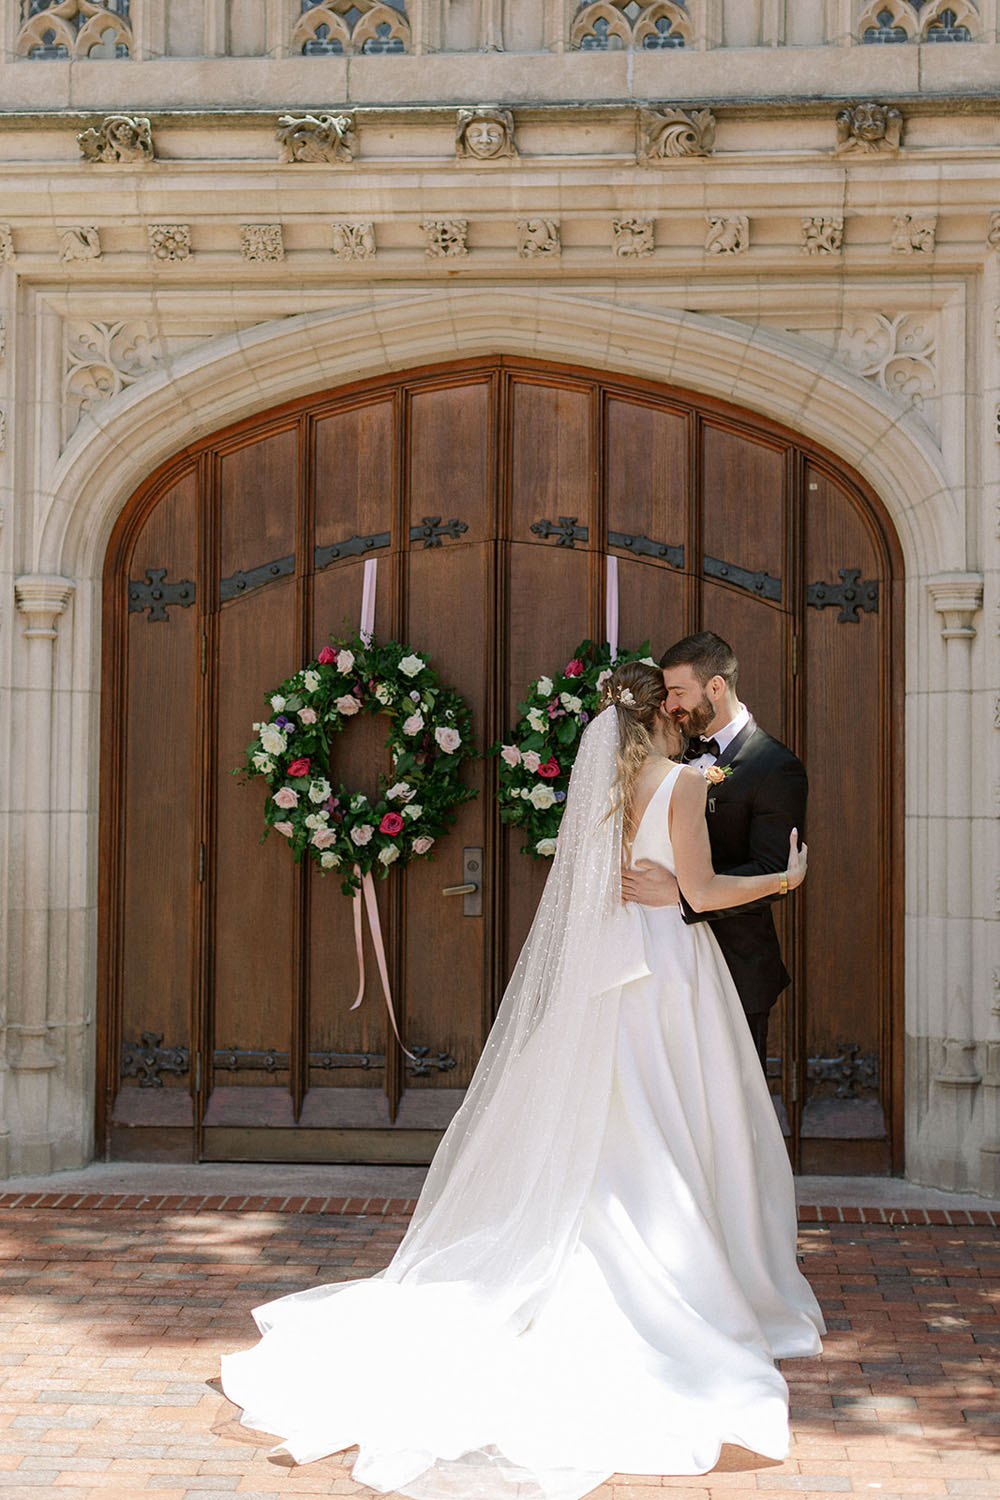 A lush and lively wedding in St. Louis filled with bold color and elegant details